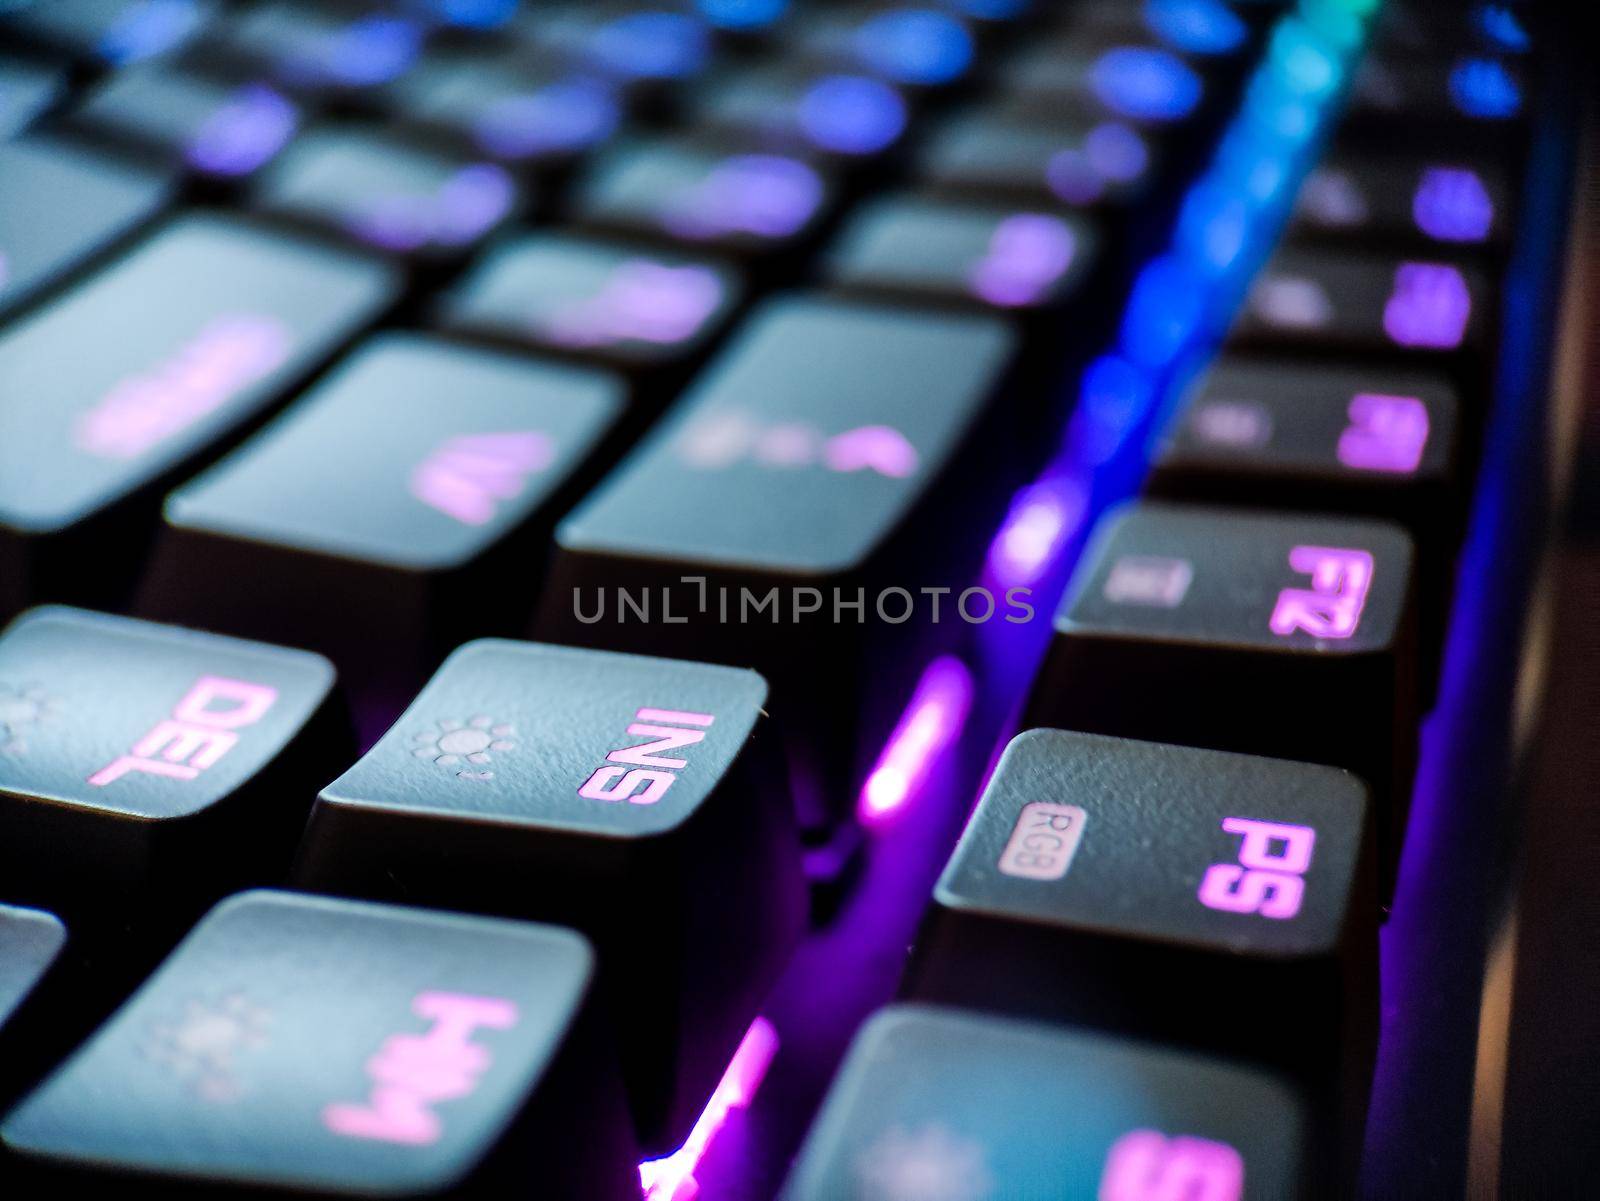 Gamer keyboard with neon backlight macro defocused close up. Online games and virtual reality concept background. by iliris